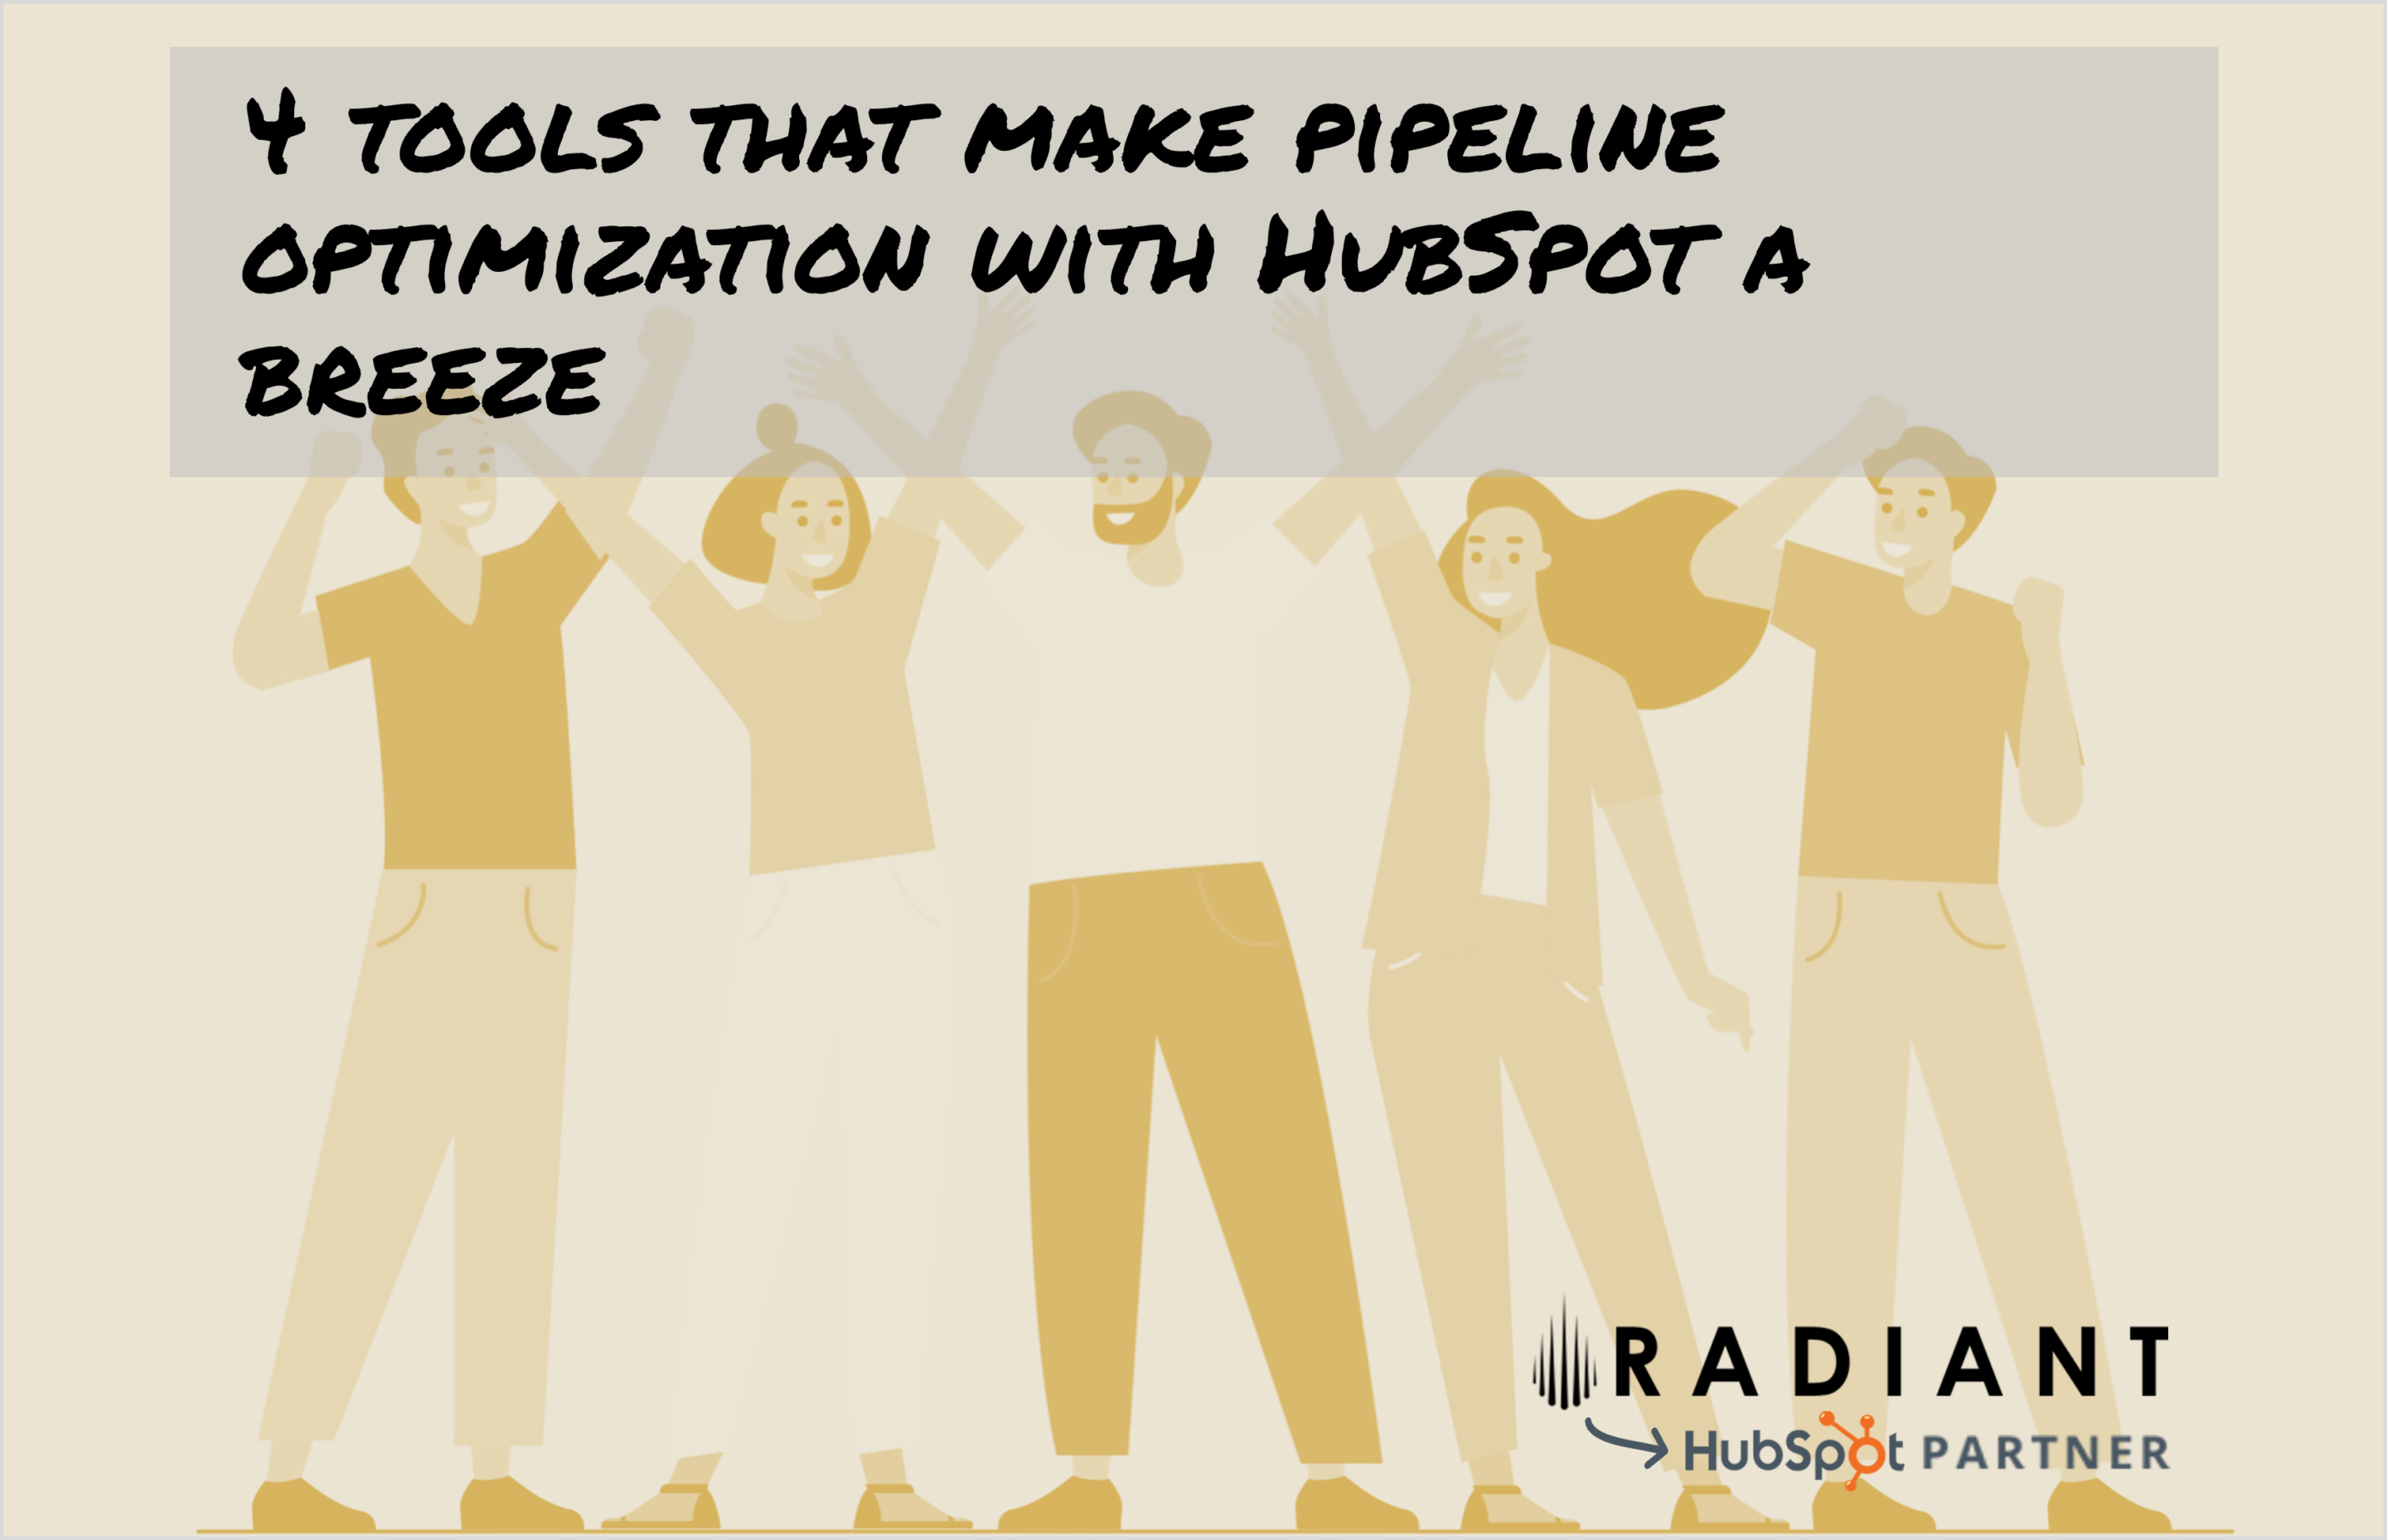 4 tools that make pipeline optimization with HubSpot a breeze. Learn from certified HubSpot Platinum Partner Radiant